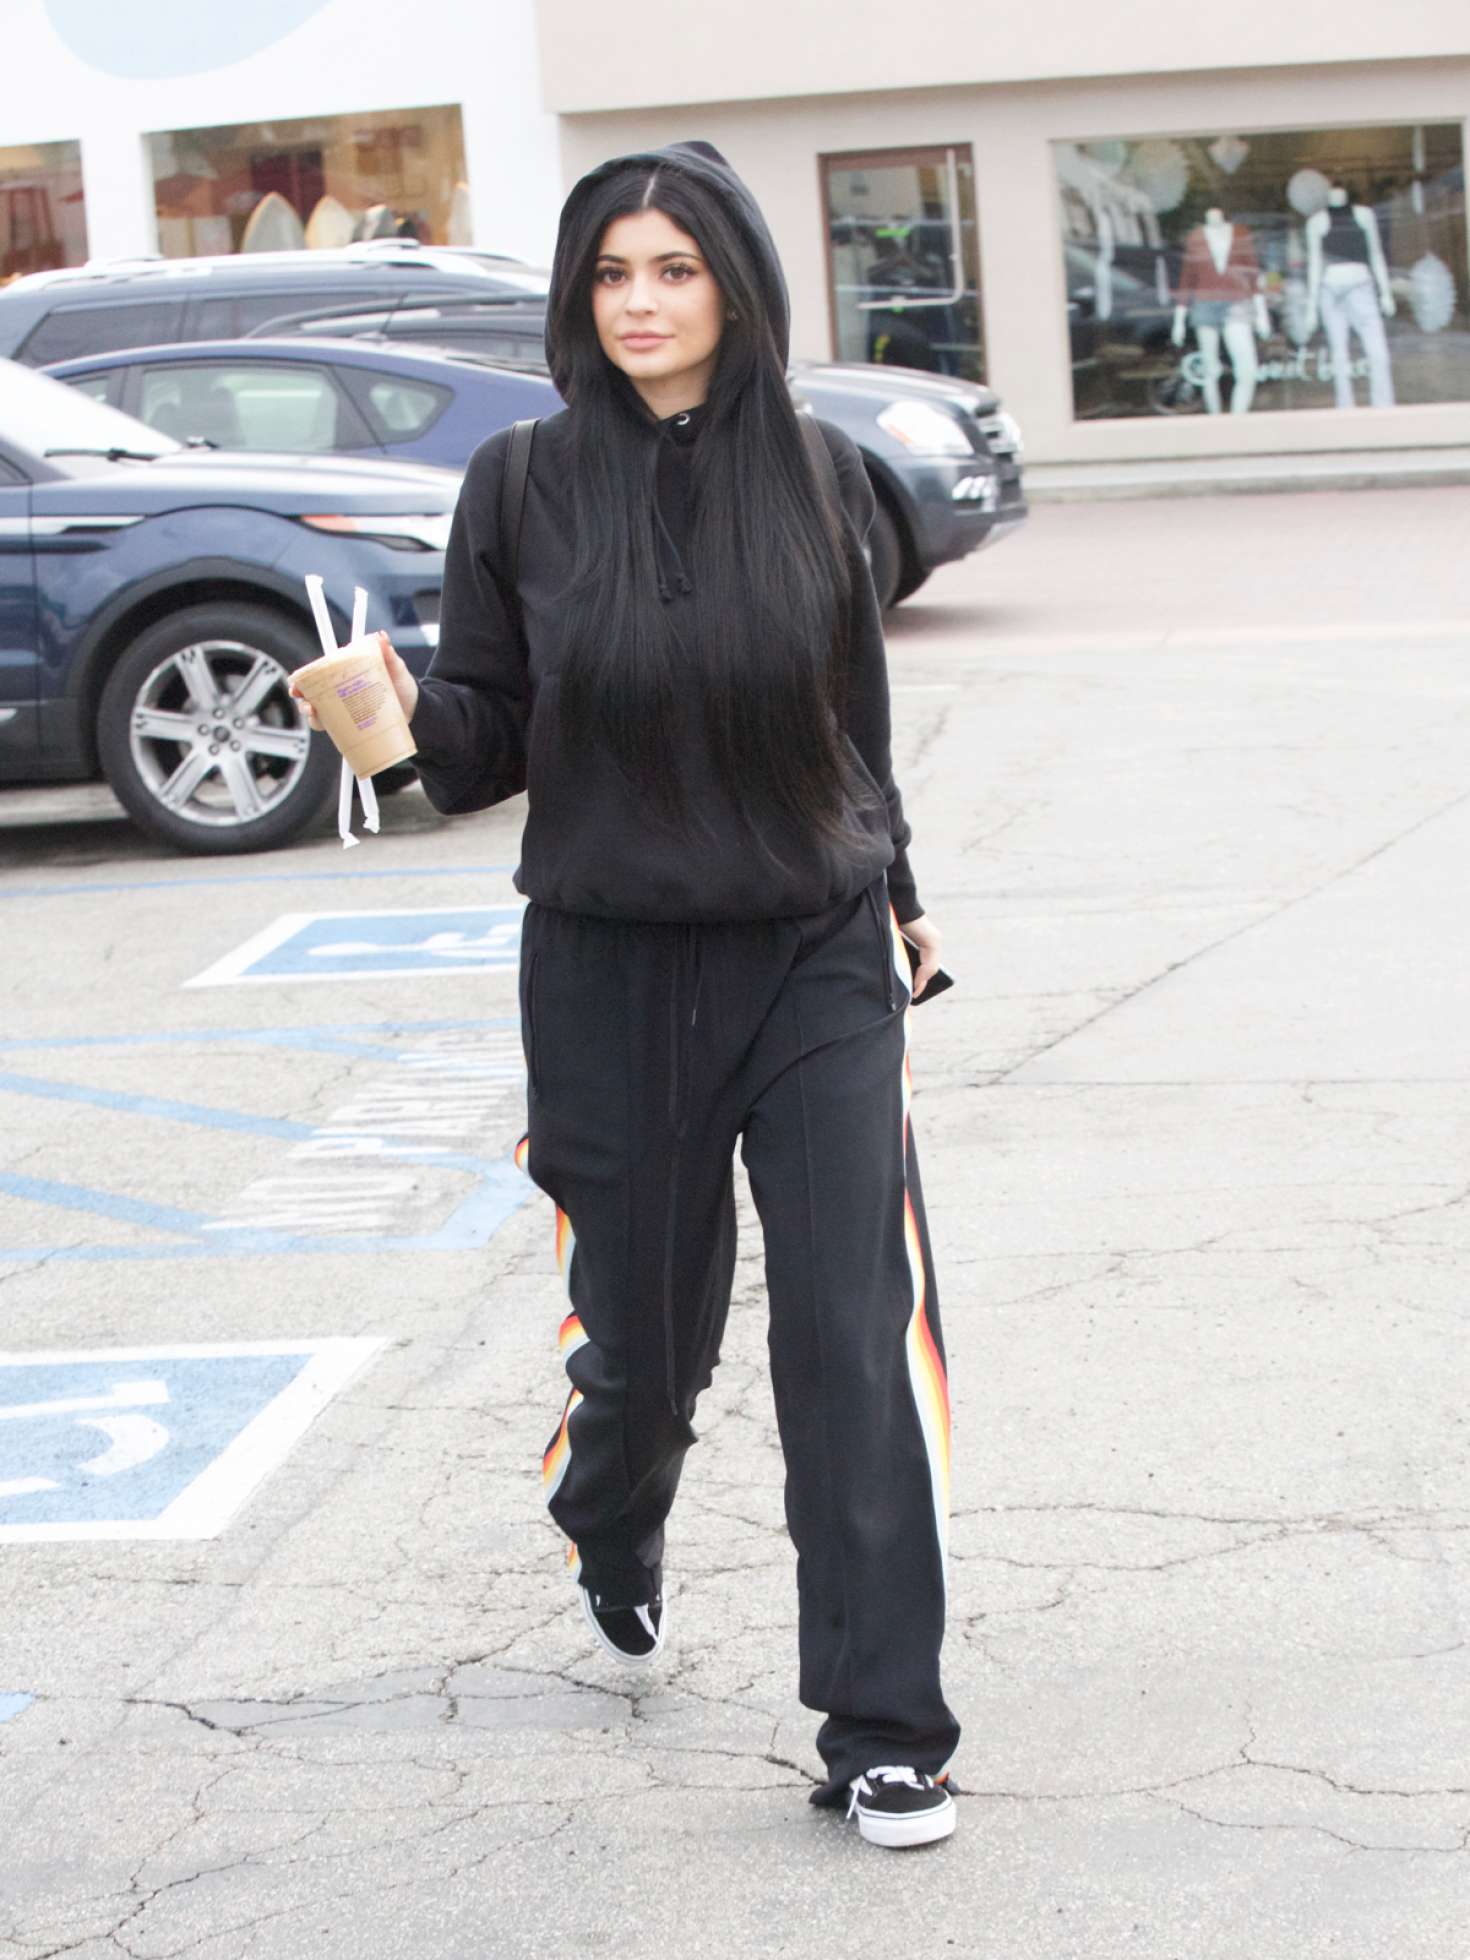 Kylie Jenner in Black Sweats out for Shopping -02 | GotCeleb